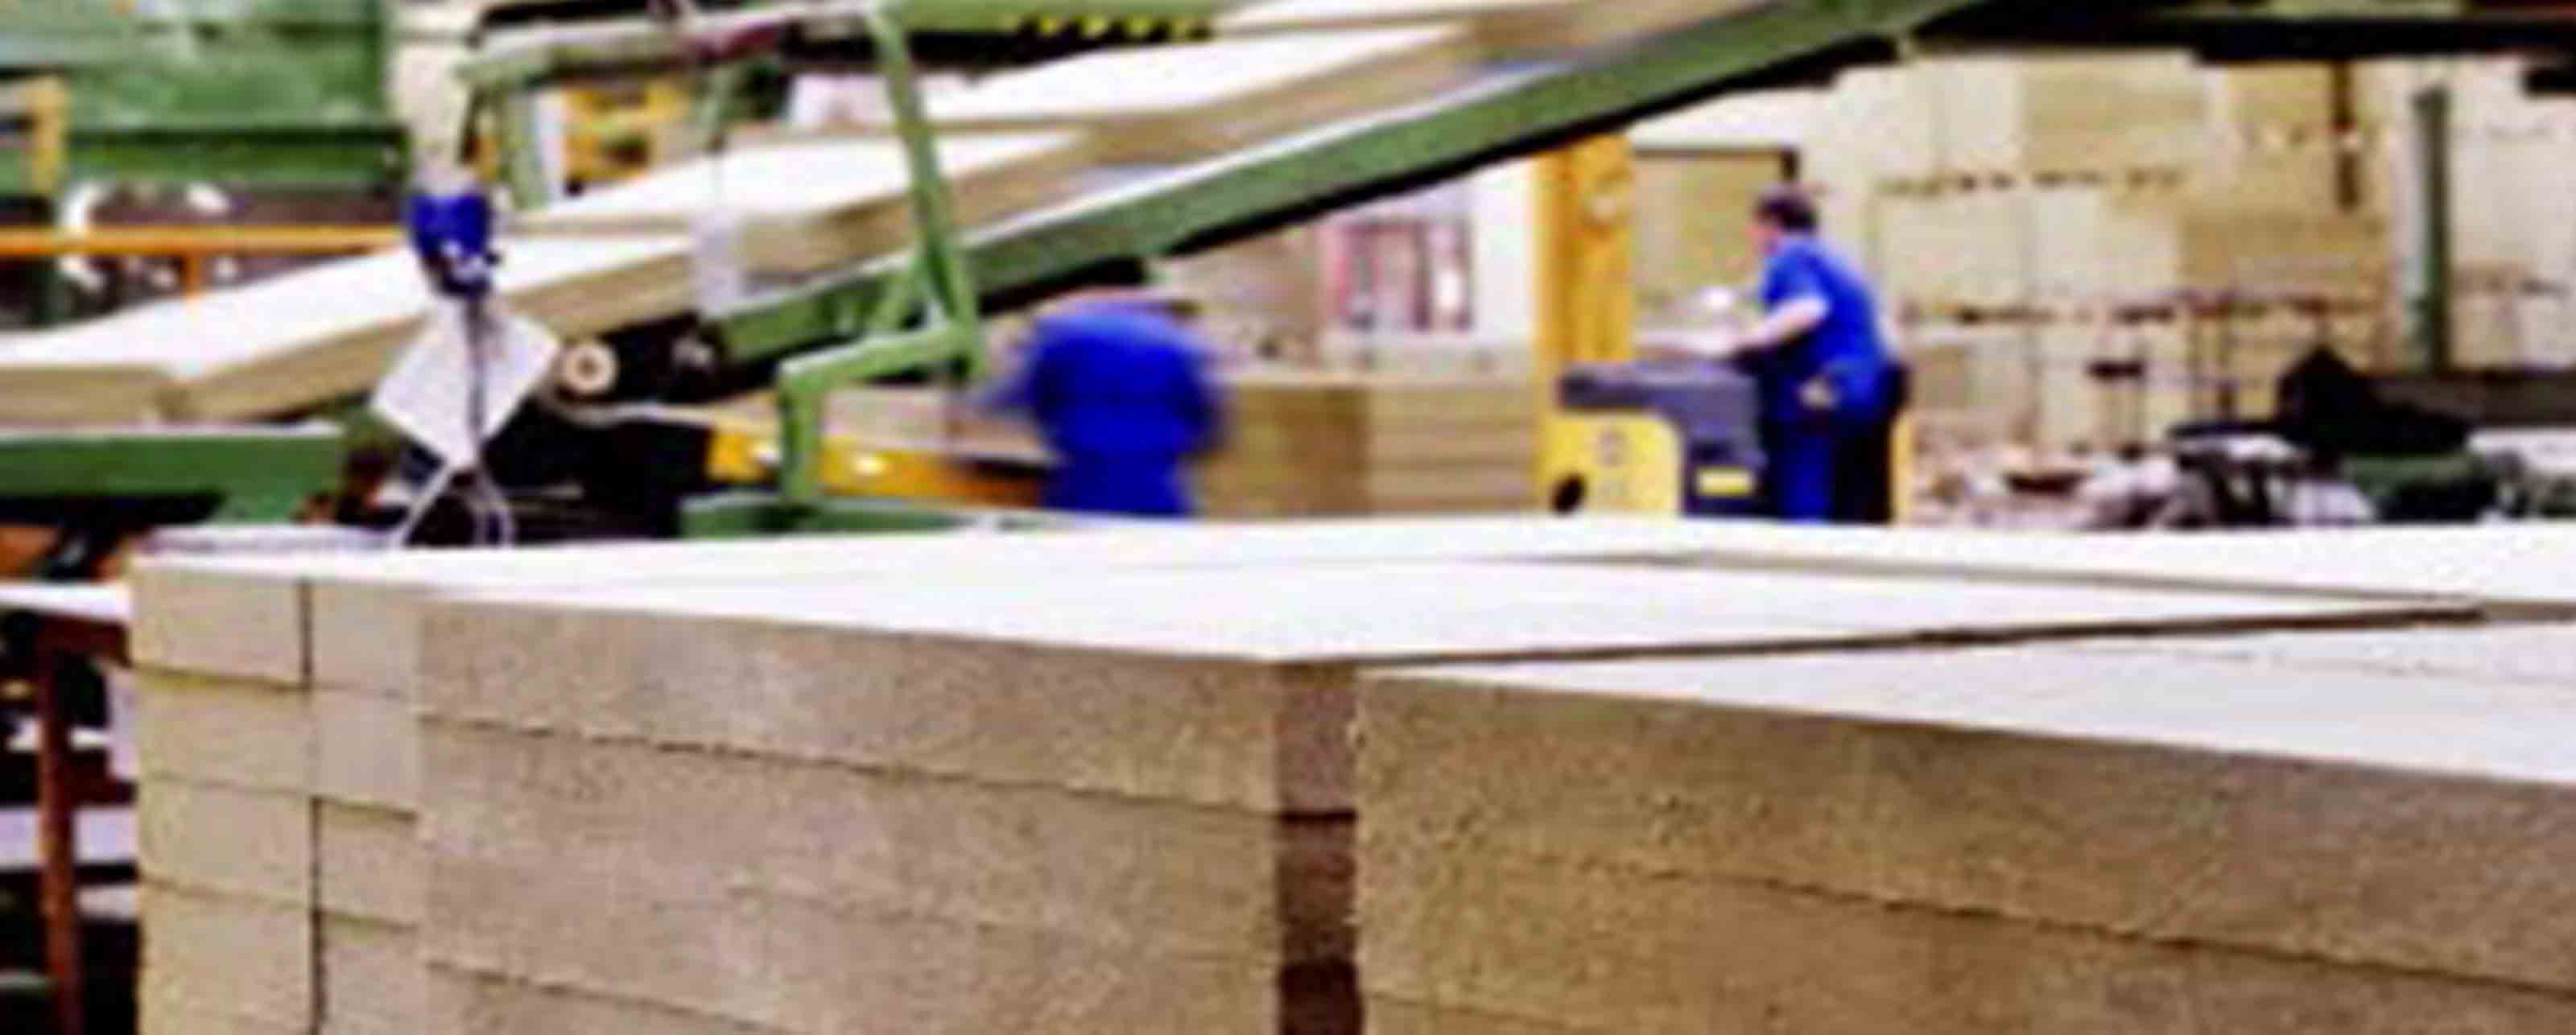 Rockwool uses GE Proficy CSense in their manufacturing processes